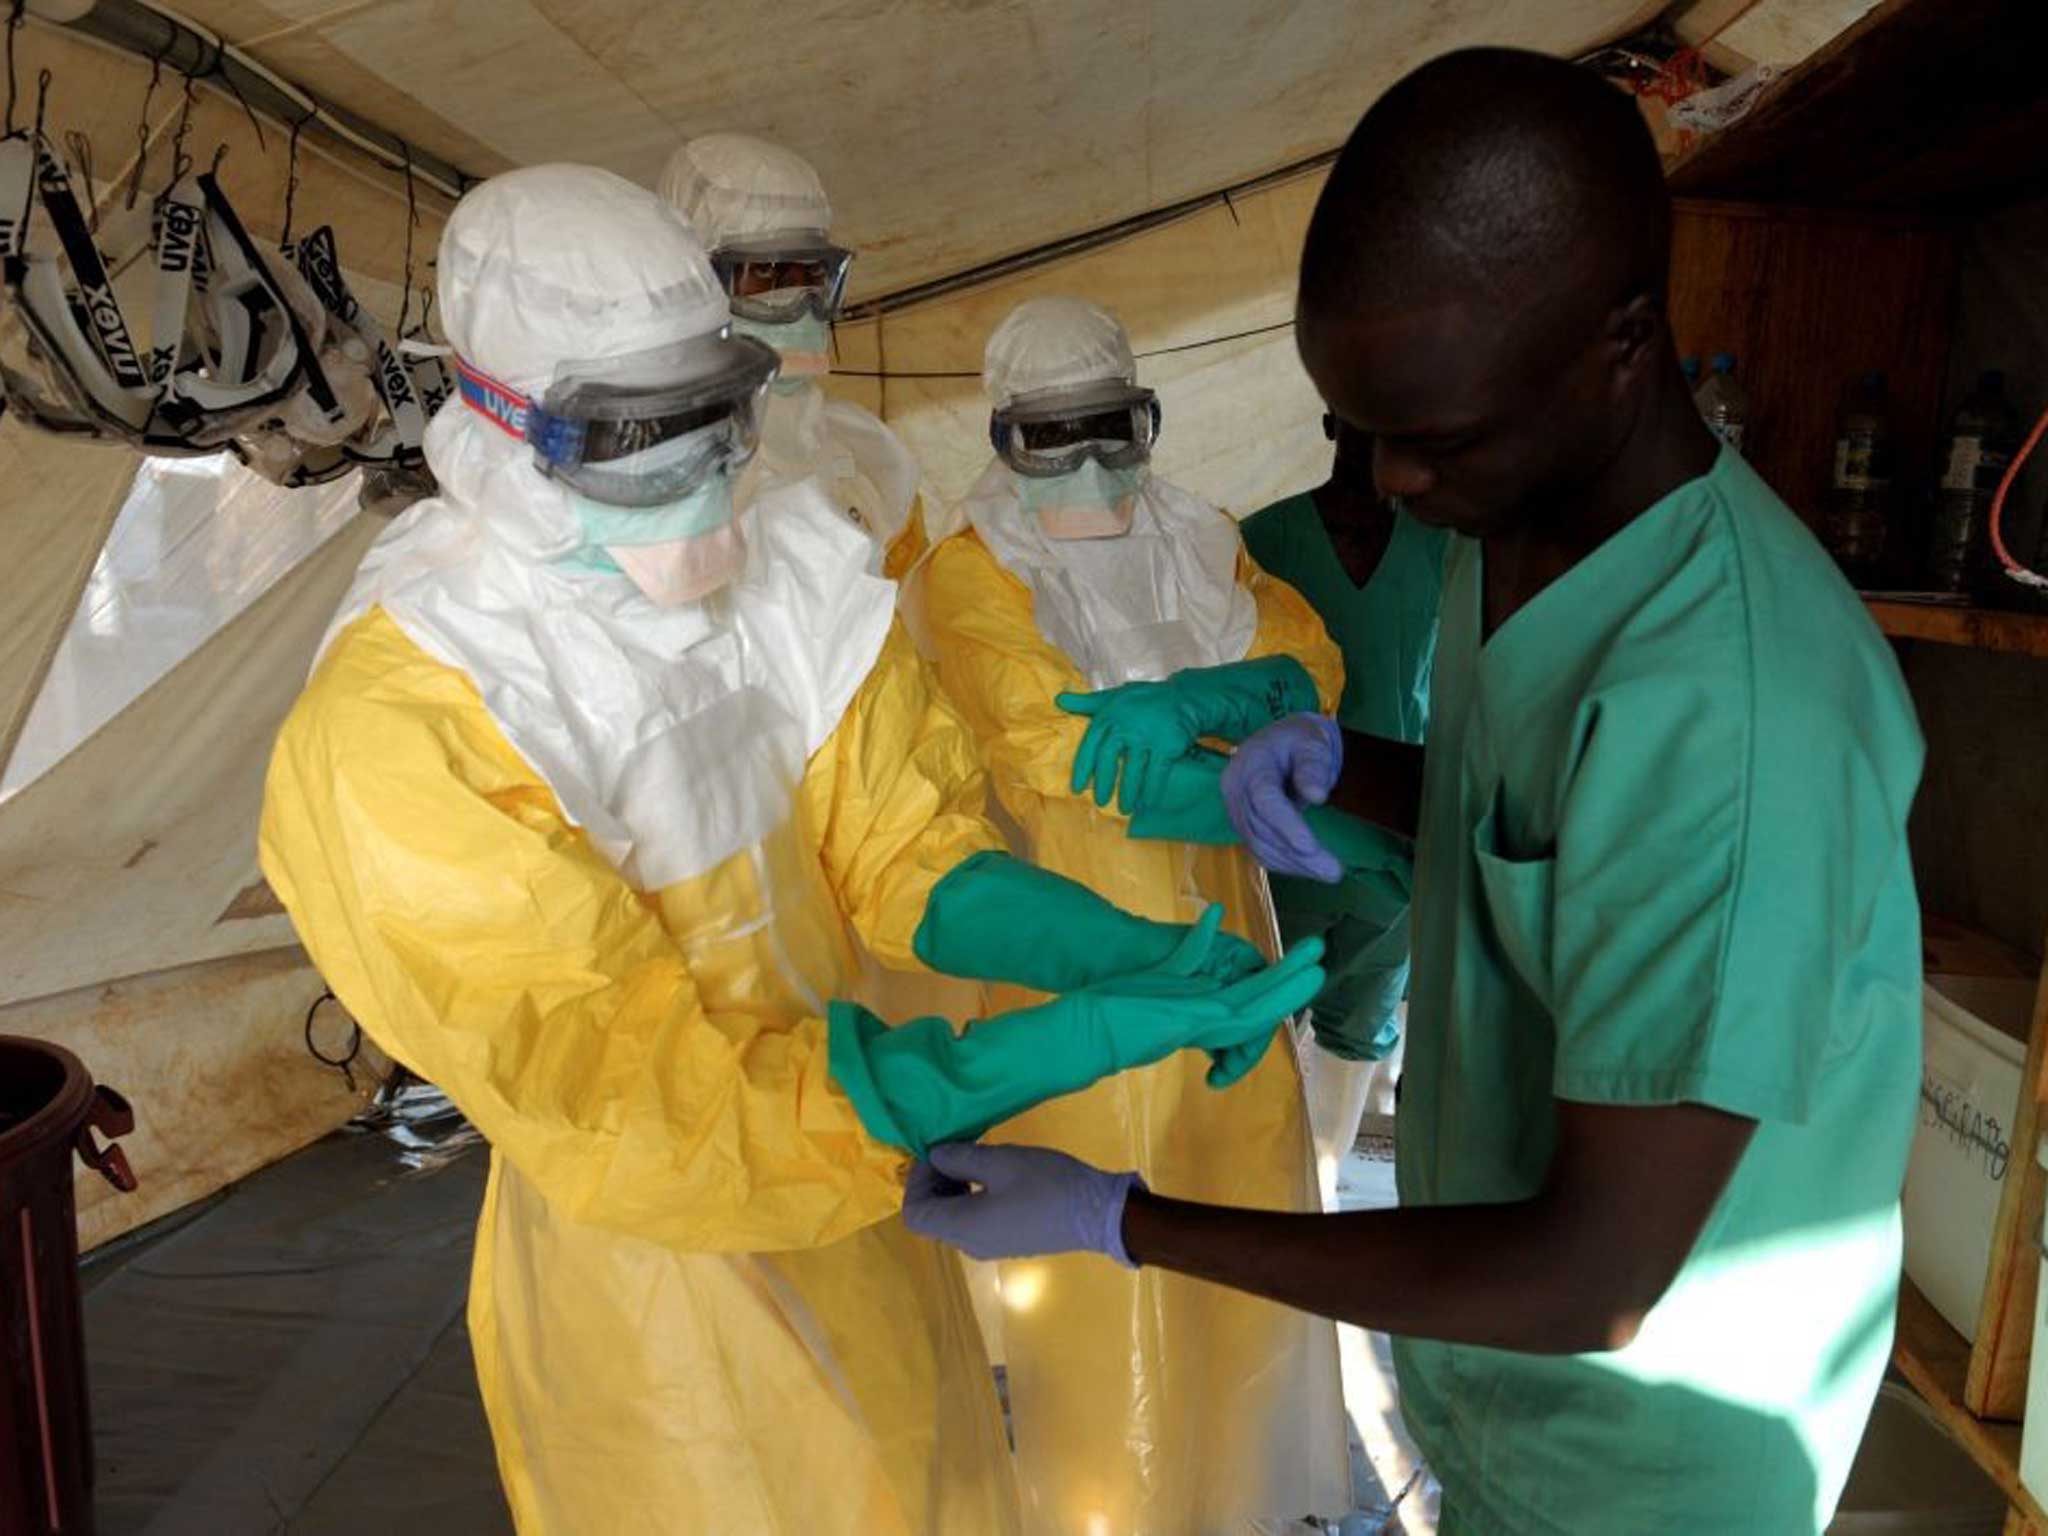 Suit Up: Ebola is spread by contact with bodily fluids, so protection is vital